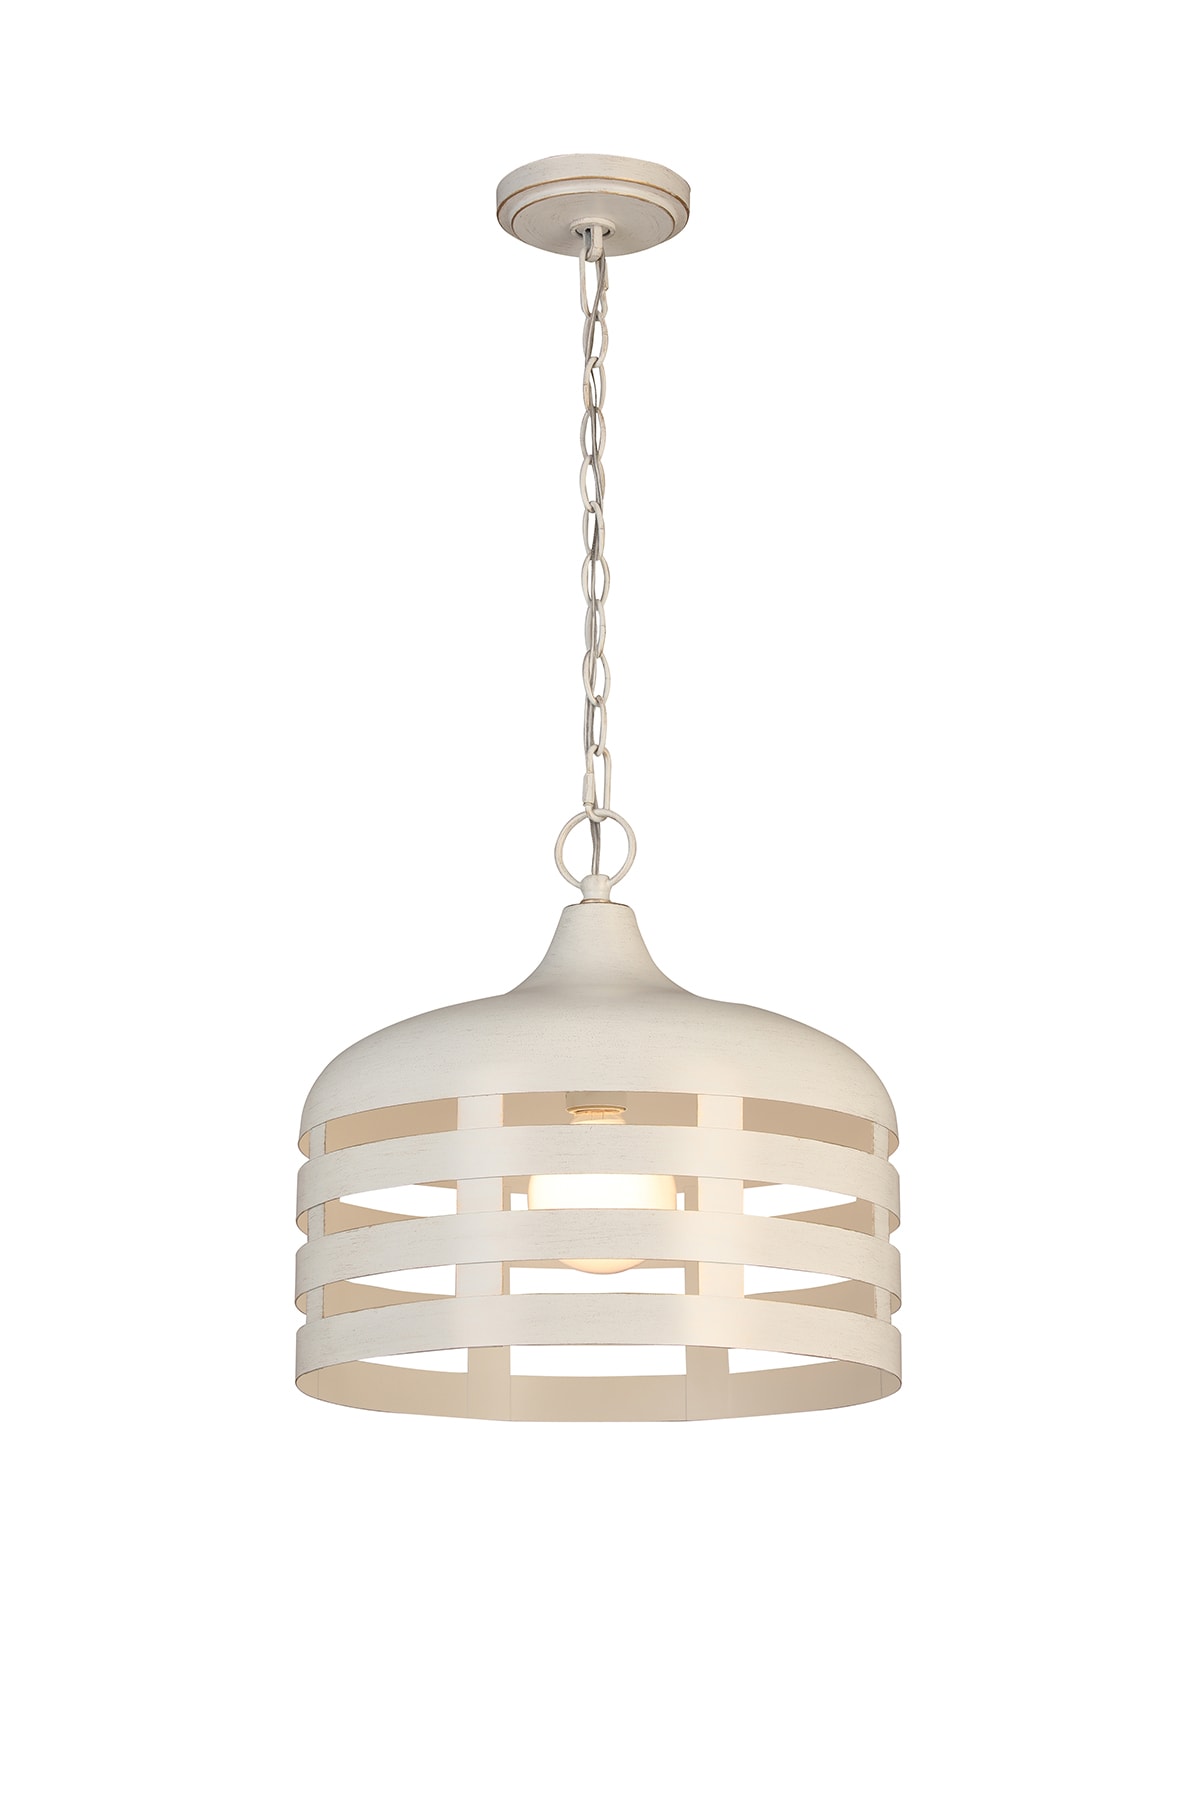 allen + roth Scout French White Transitional Drum Pendant Light